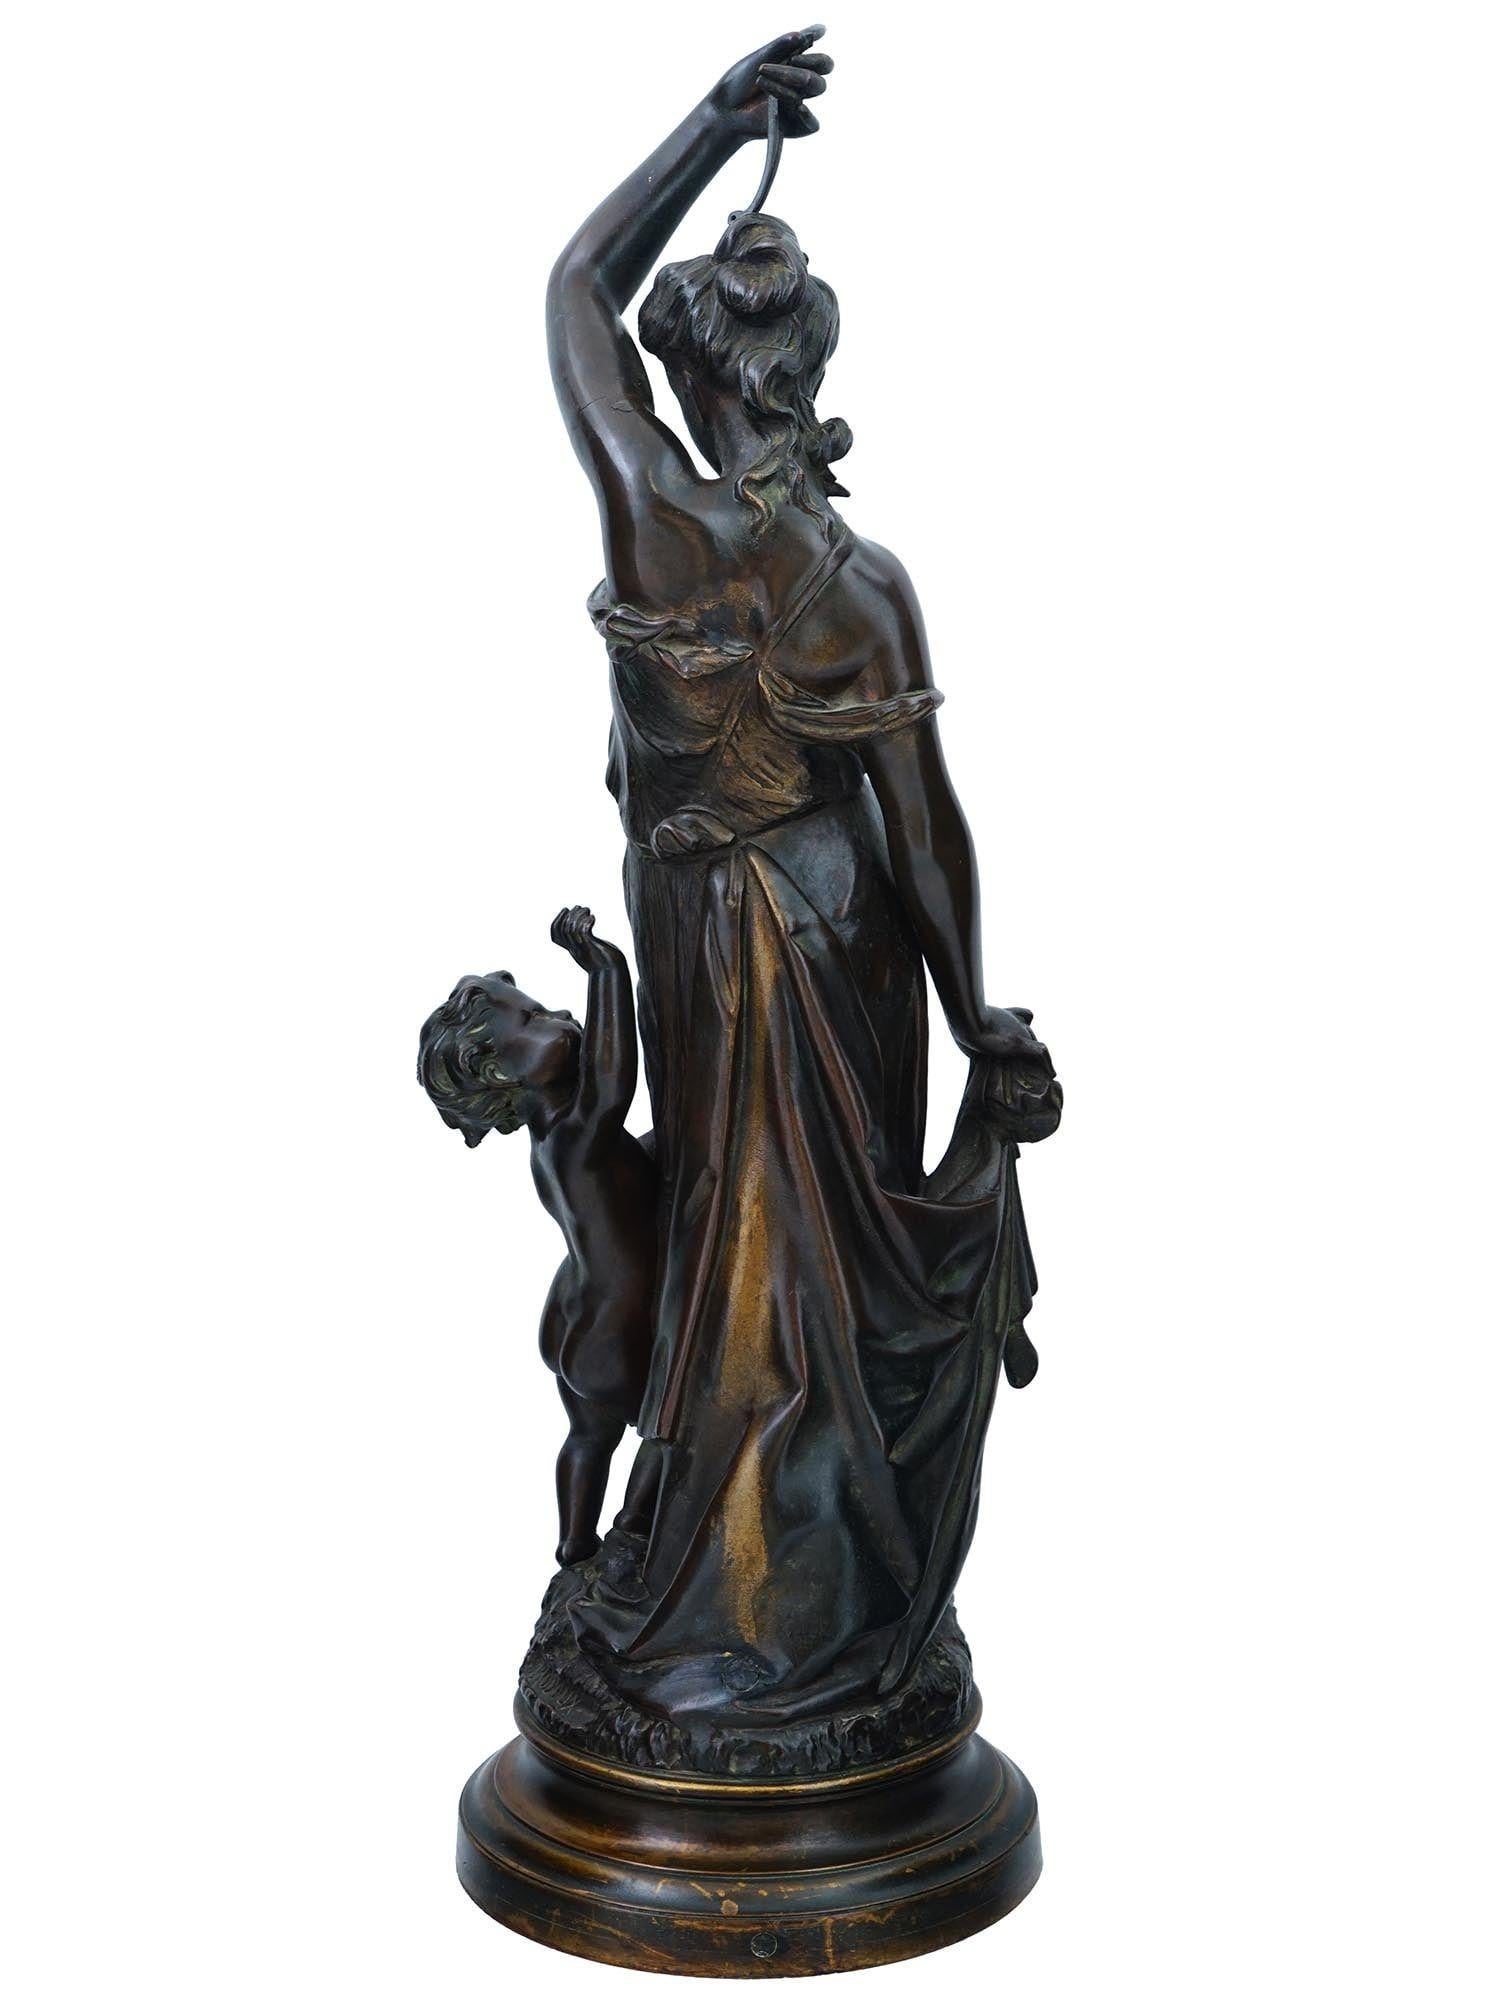 Antique (19th century) patinated bronze sculpture, Amour Desarme (Love Disarmed) after the original model by Henri Emile Adrien Trodoux (1815-1881), depicting the Roman goddess, Venus, teasing Cupid at her feet, holding his bow above her head.